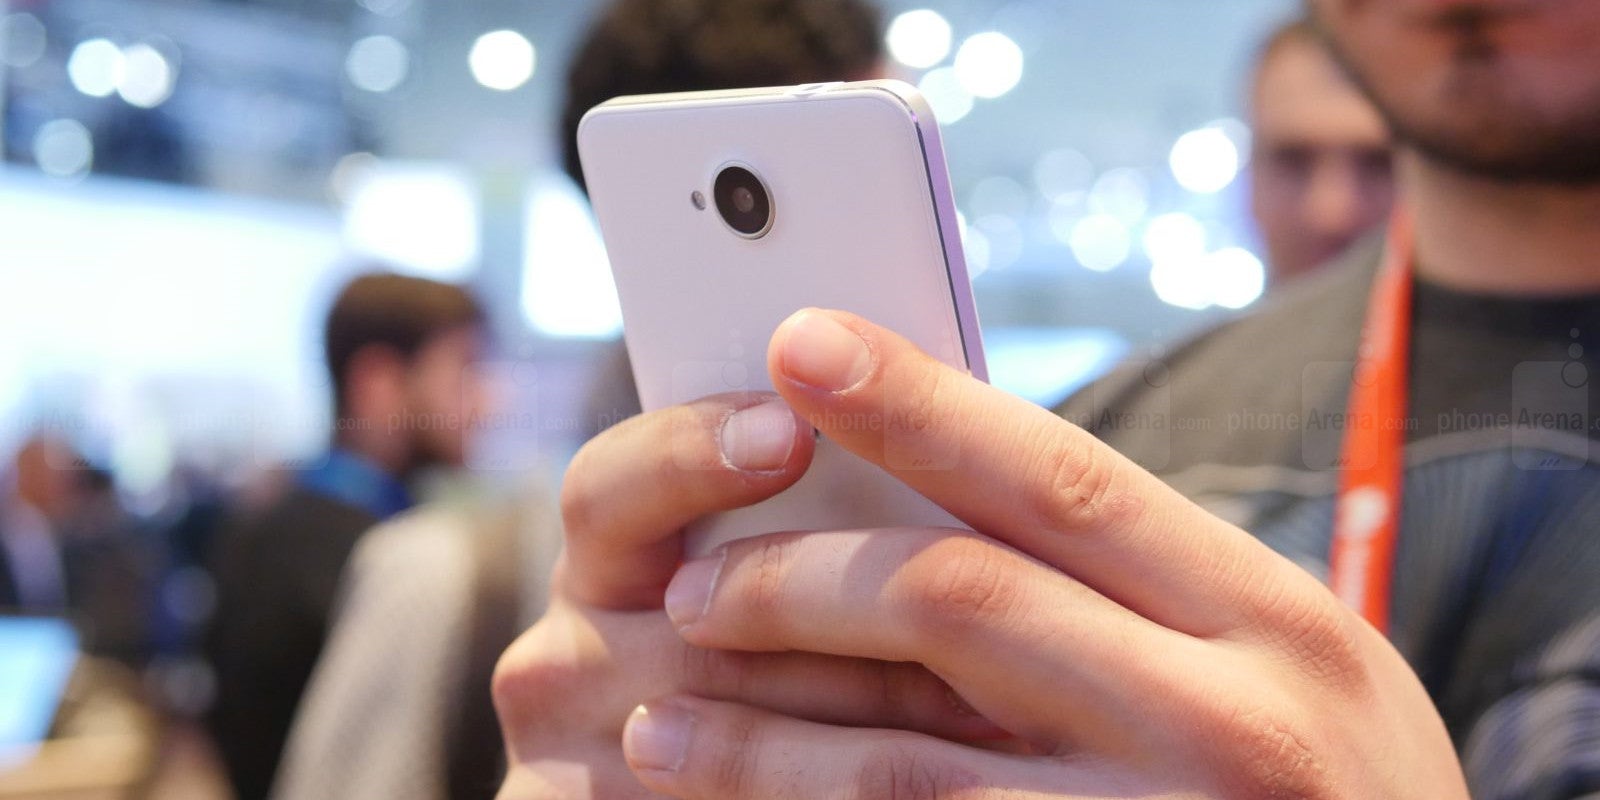 Microsoft Lumia 650 hands-on: well that's a nice entry-level device!